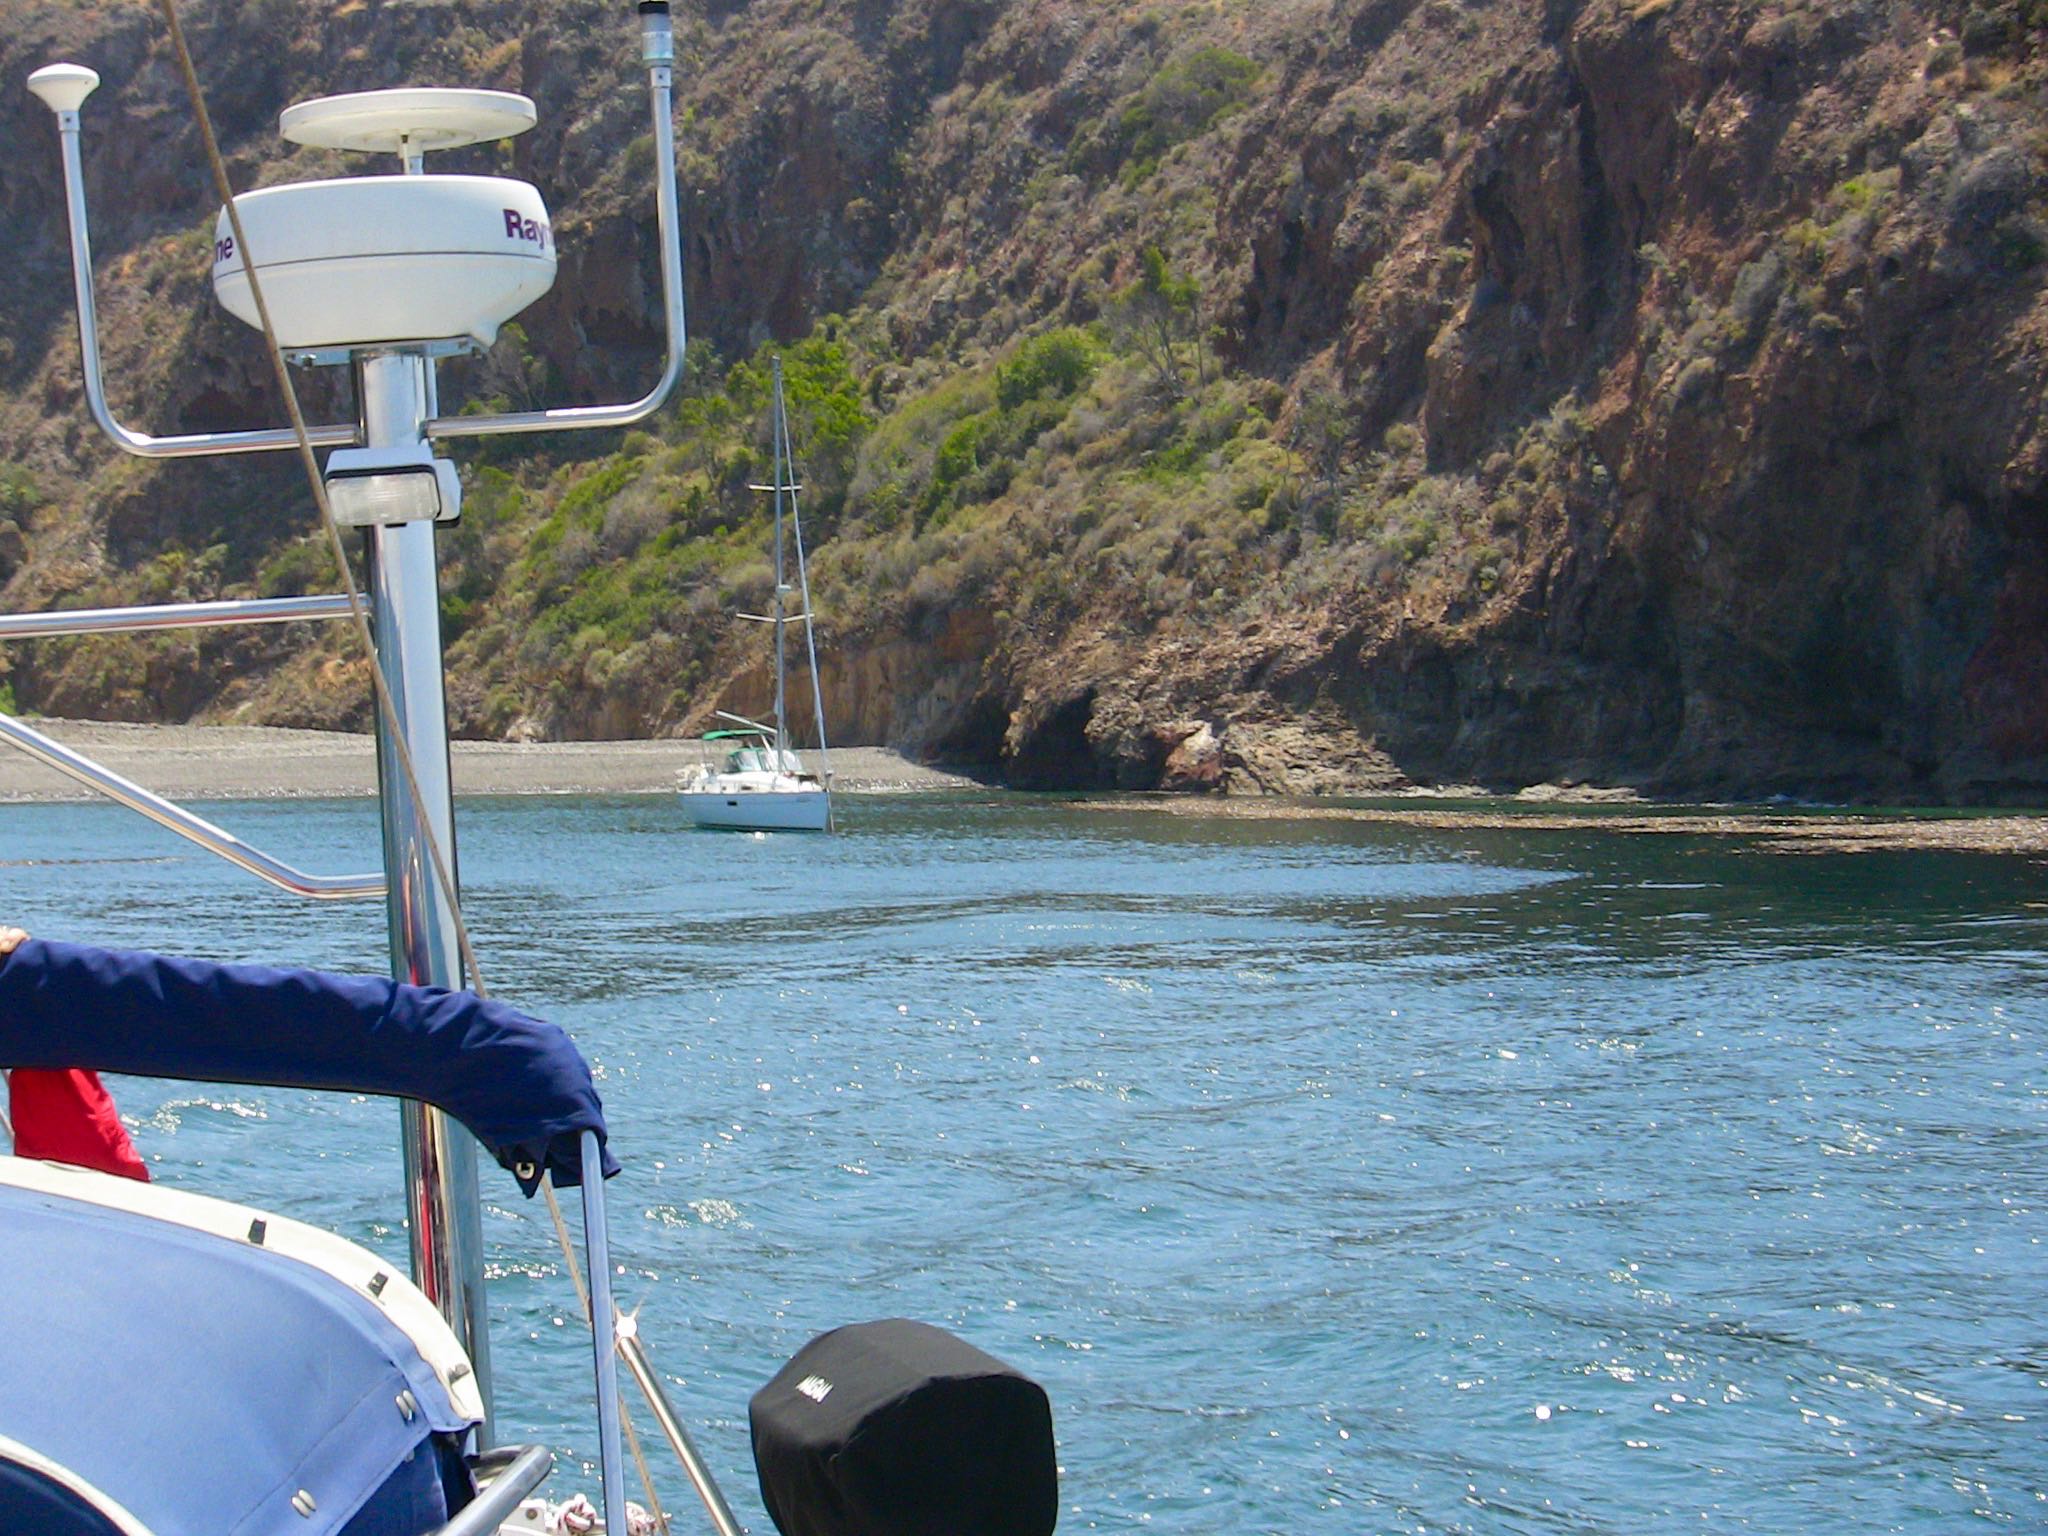 Sail to Twin Harbors on Santa Cruz Island with Capt. Dan Ryder and Sail Channel Islands